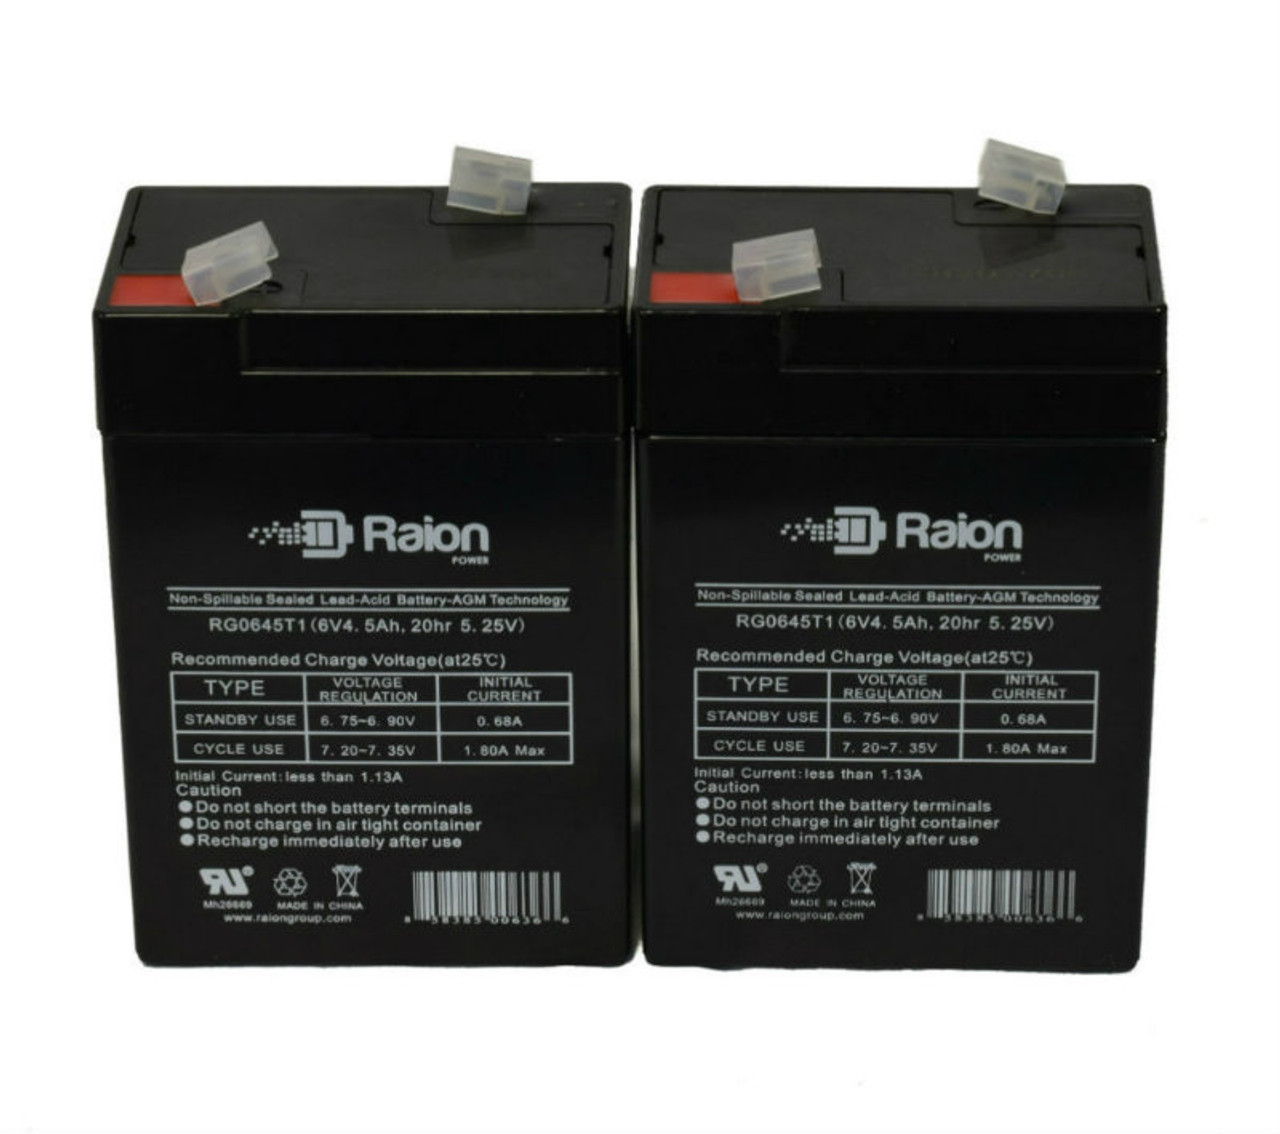 Raion Power RG0645T1 6V 4.5Ah Replacement Battery Cartridge for Aosom 370-038BK 12V Kids Jeep Ride On Car - 2 Pack